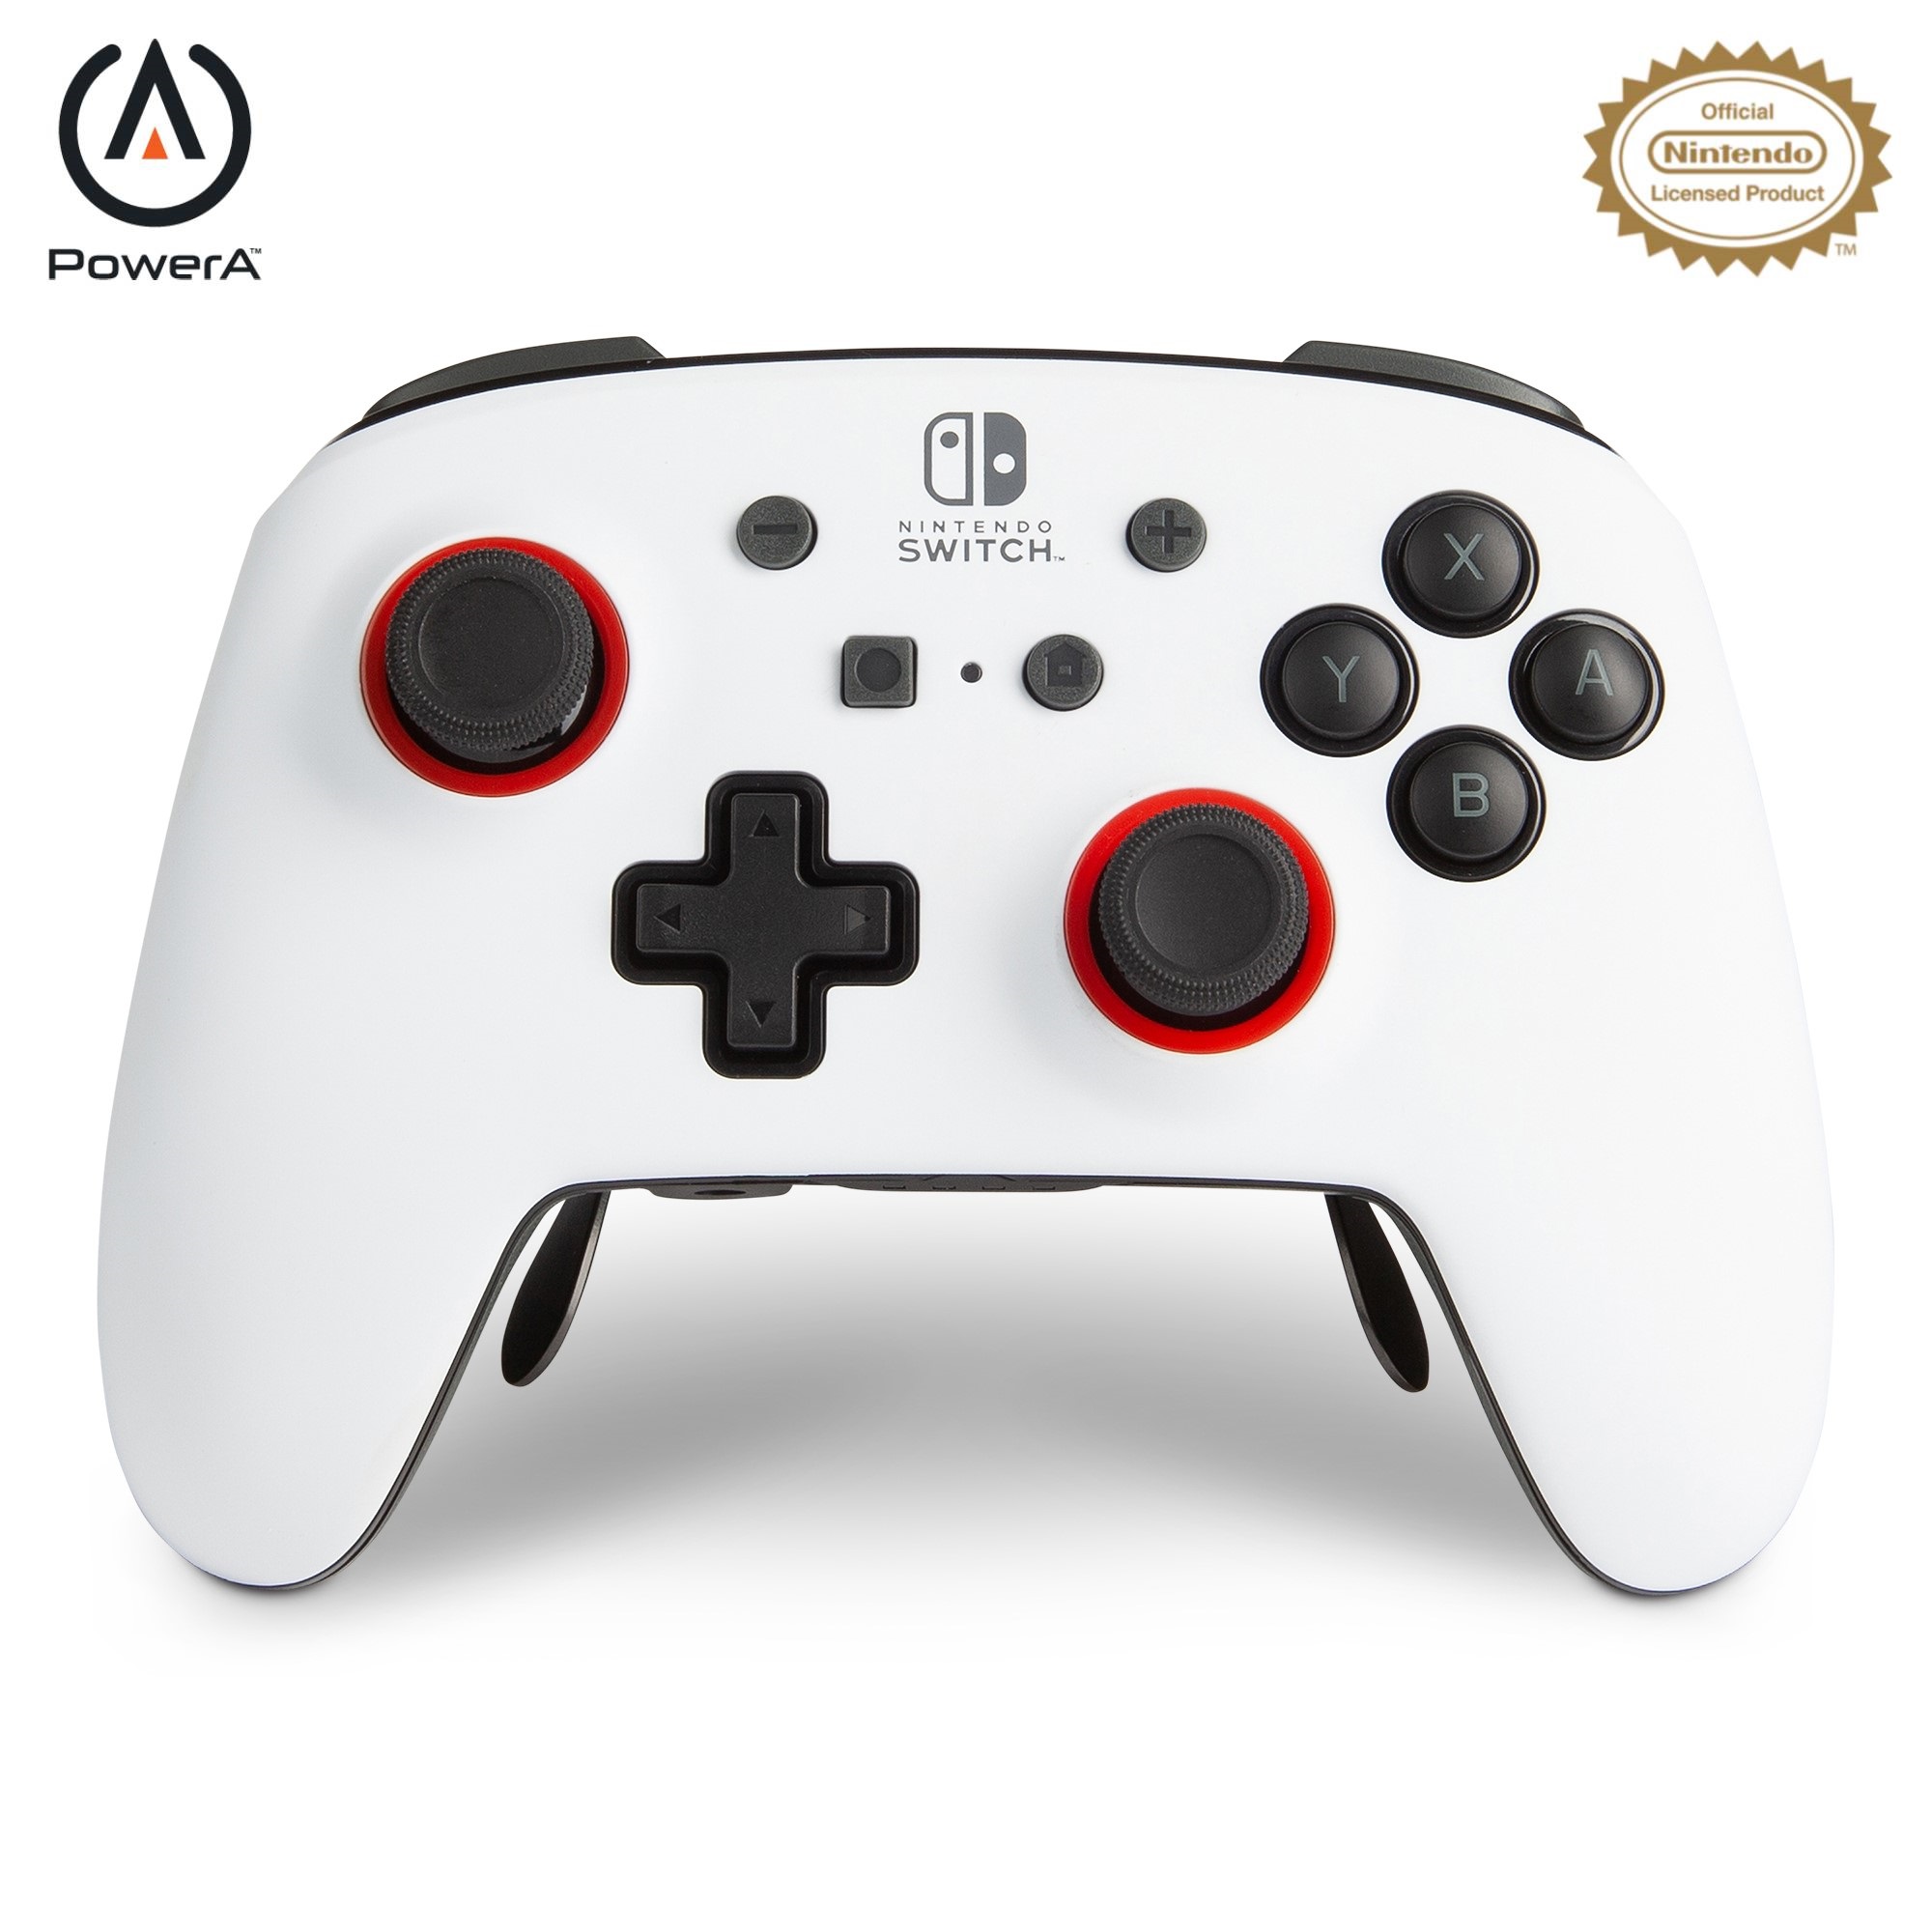 Nintendo Switch controllers, cases & gaming accessories